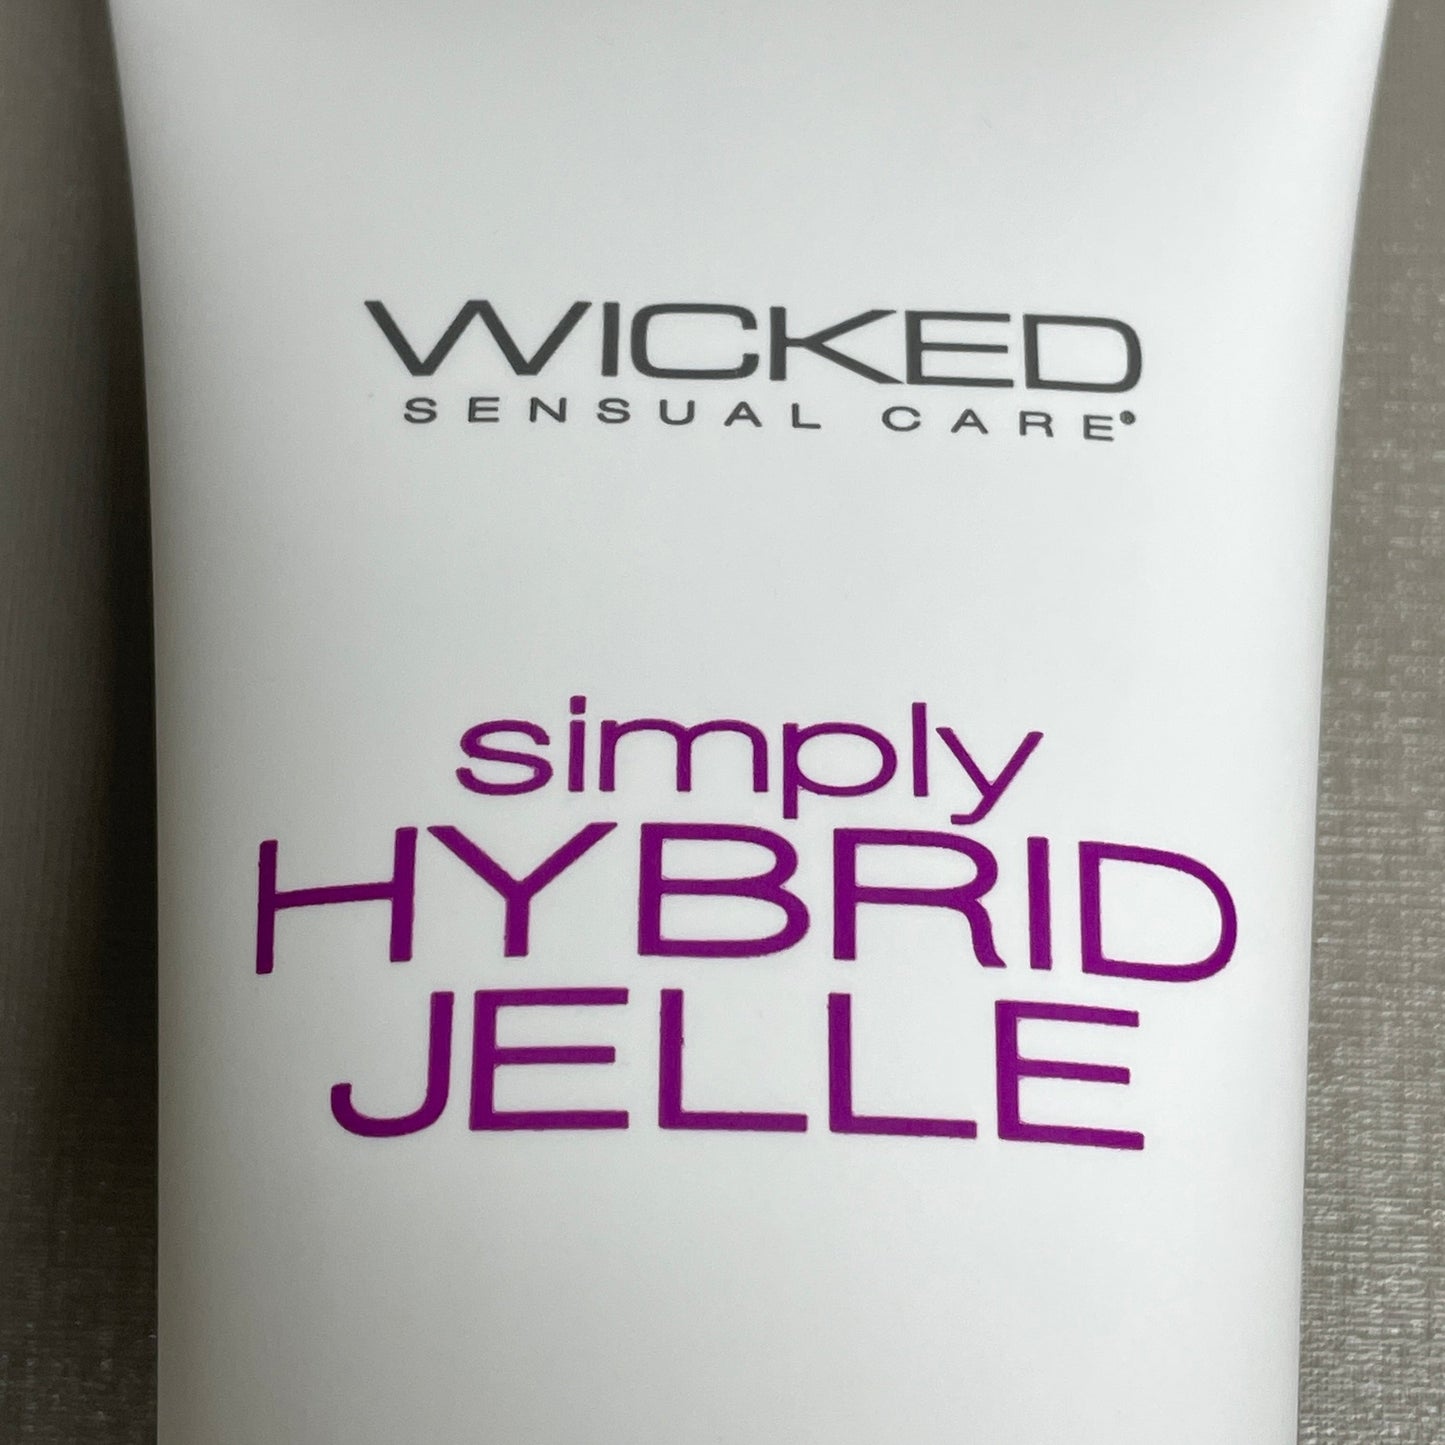 WICKED SENSUAL CARE 10 PK Simply Hybrid Jelle Clean & Simple Water & Silicone Blended Gel Lubricant 4 oz Exp. 09/24 (New)